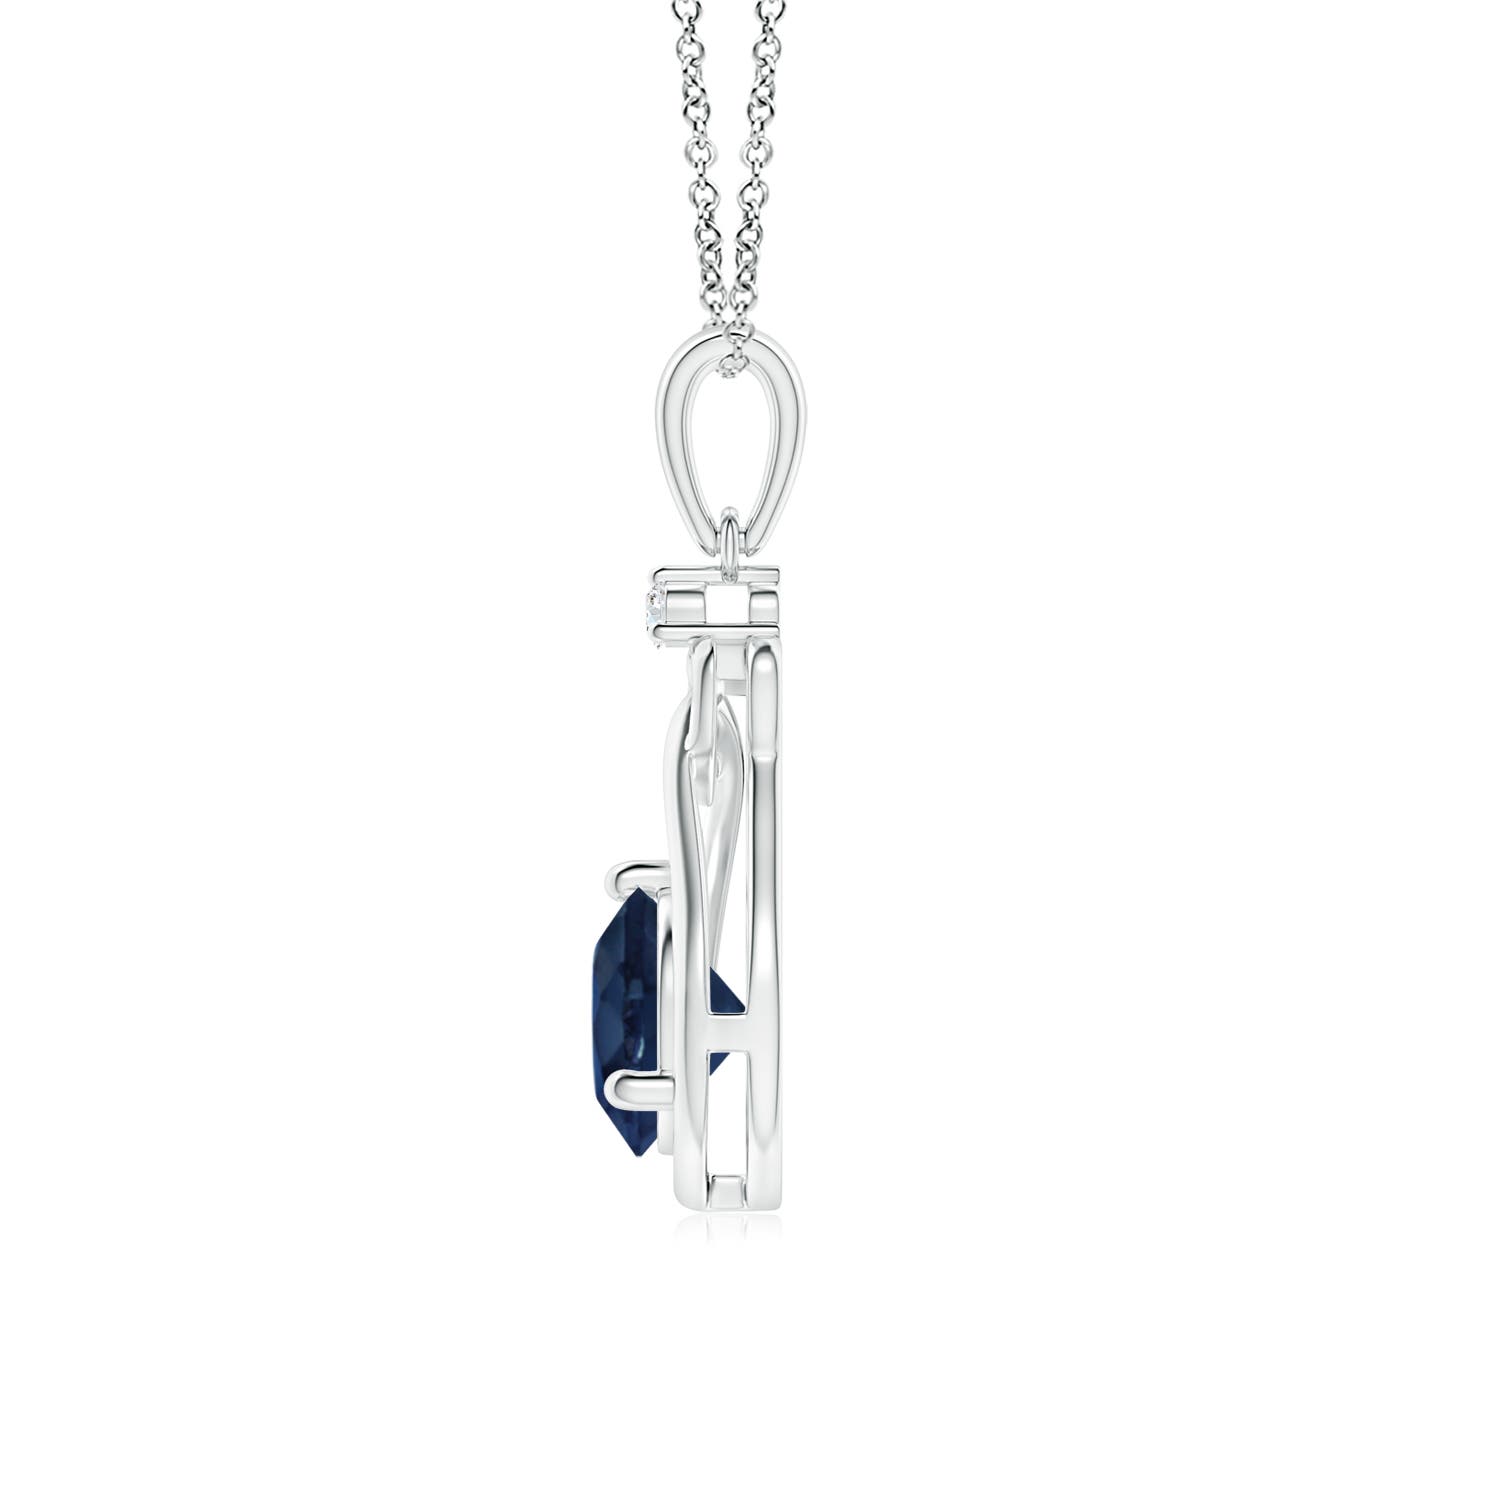 AA - Blue Sapphire / 1.01 CT / 14 KT White Gold